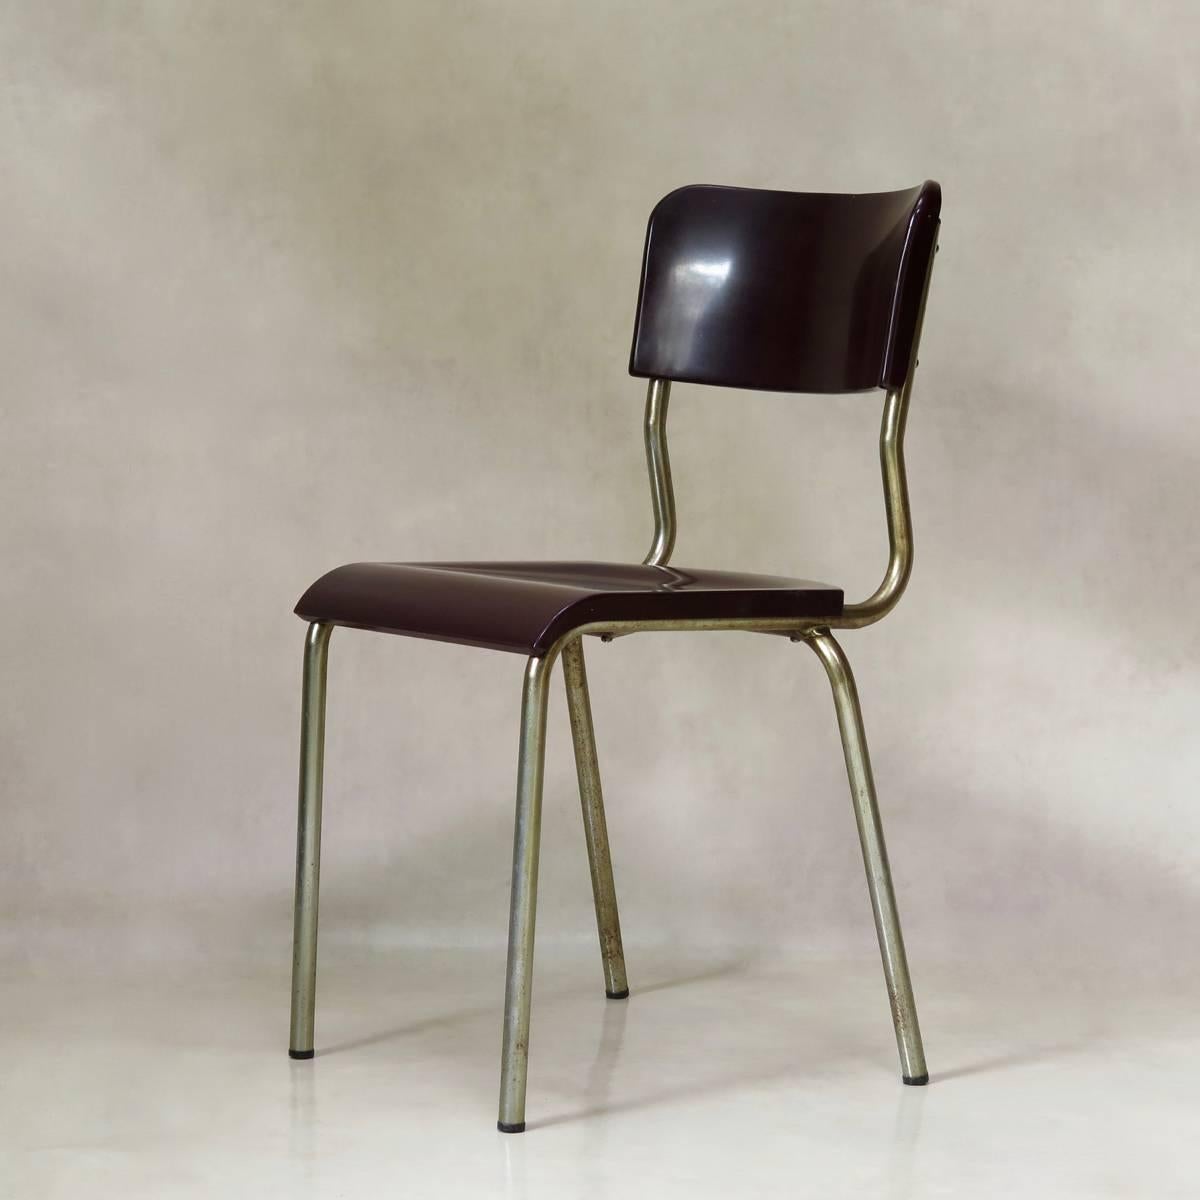 Handsome set of Mid-Century chairs by French designer, René Herbst, known for his functional and Minimalist aesthetic. 
The seats and backs are of moulded bakelite, and the structures are chromed metal.
There are two colors: deep burgundy, and